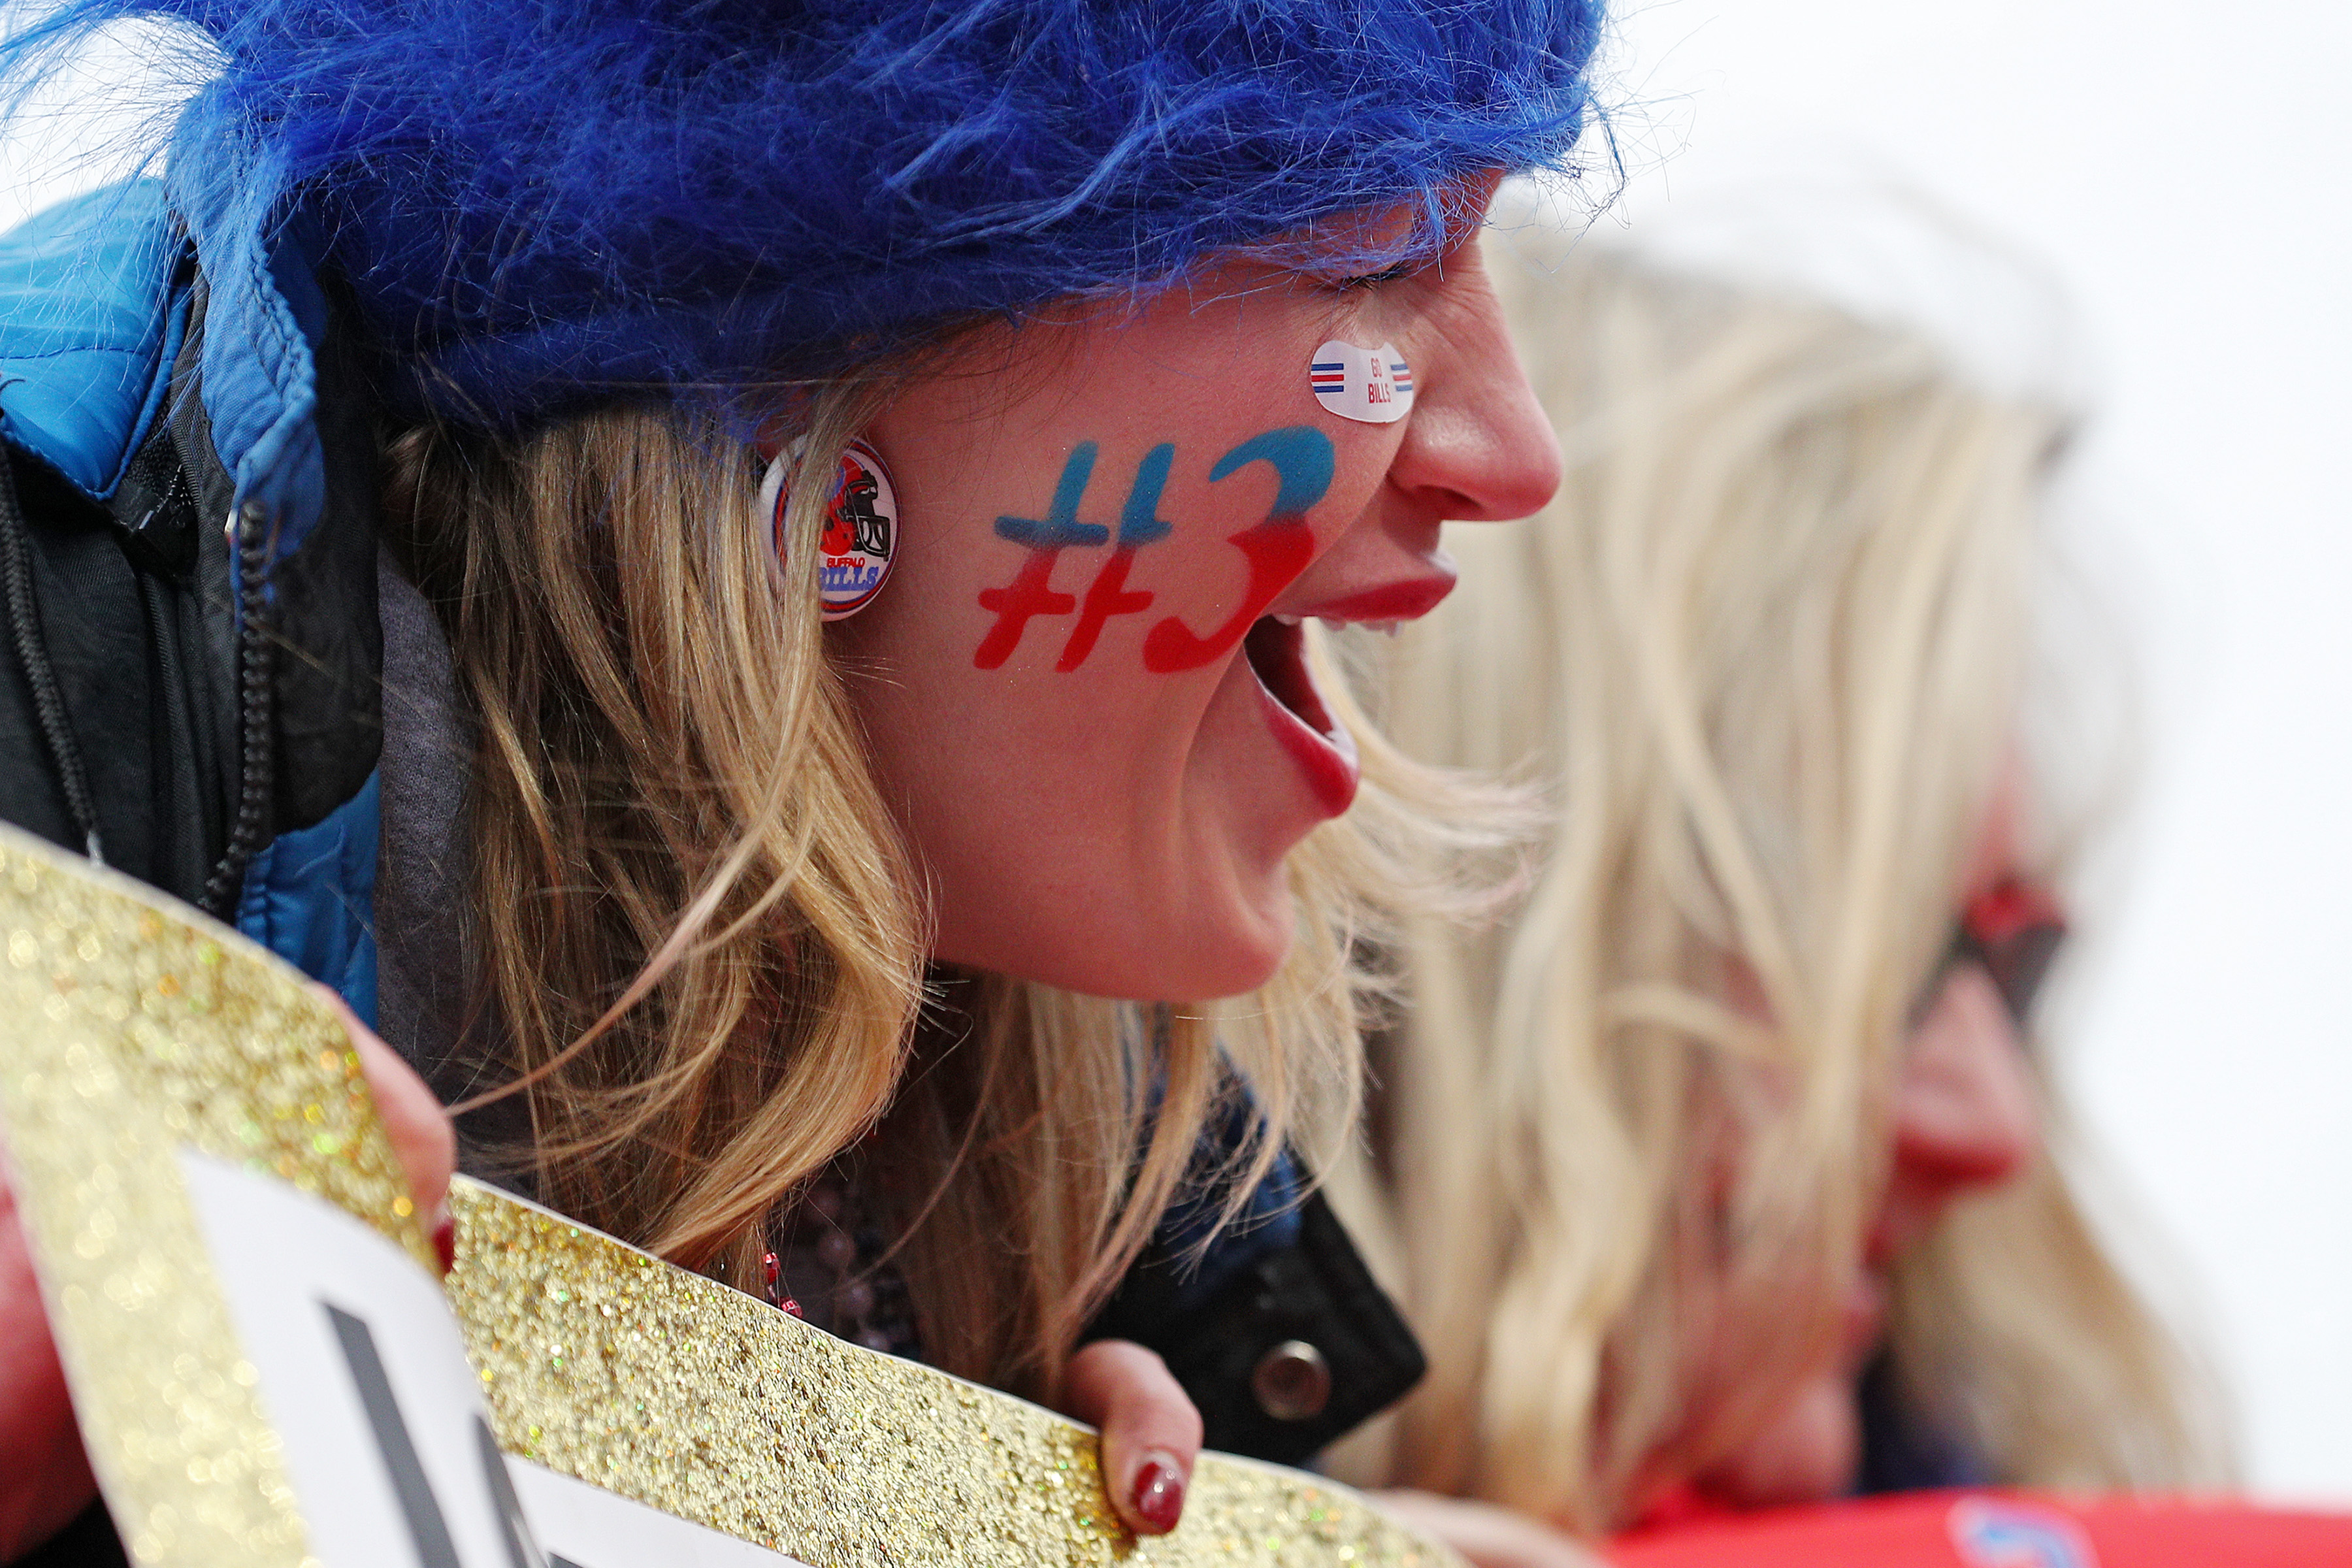 A woman has the number three painted on her face at the Buffalo Bills game on Sunday.